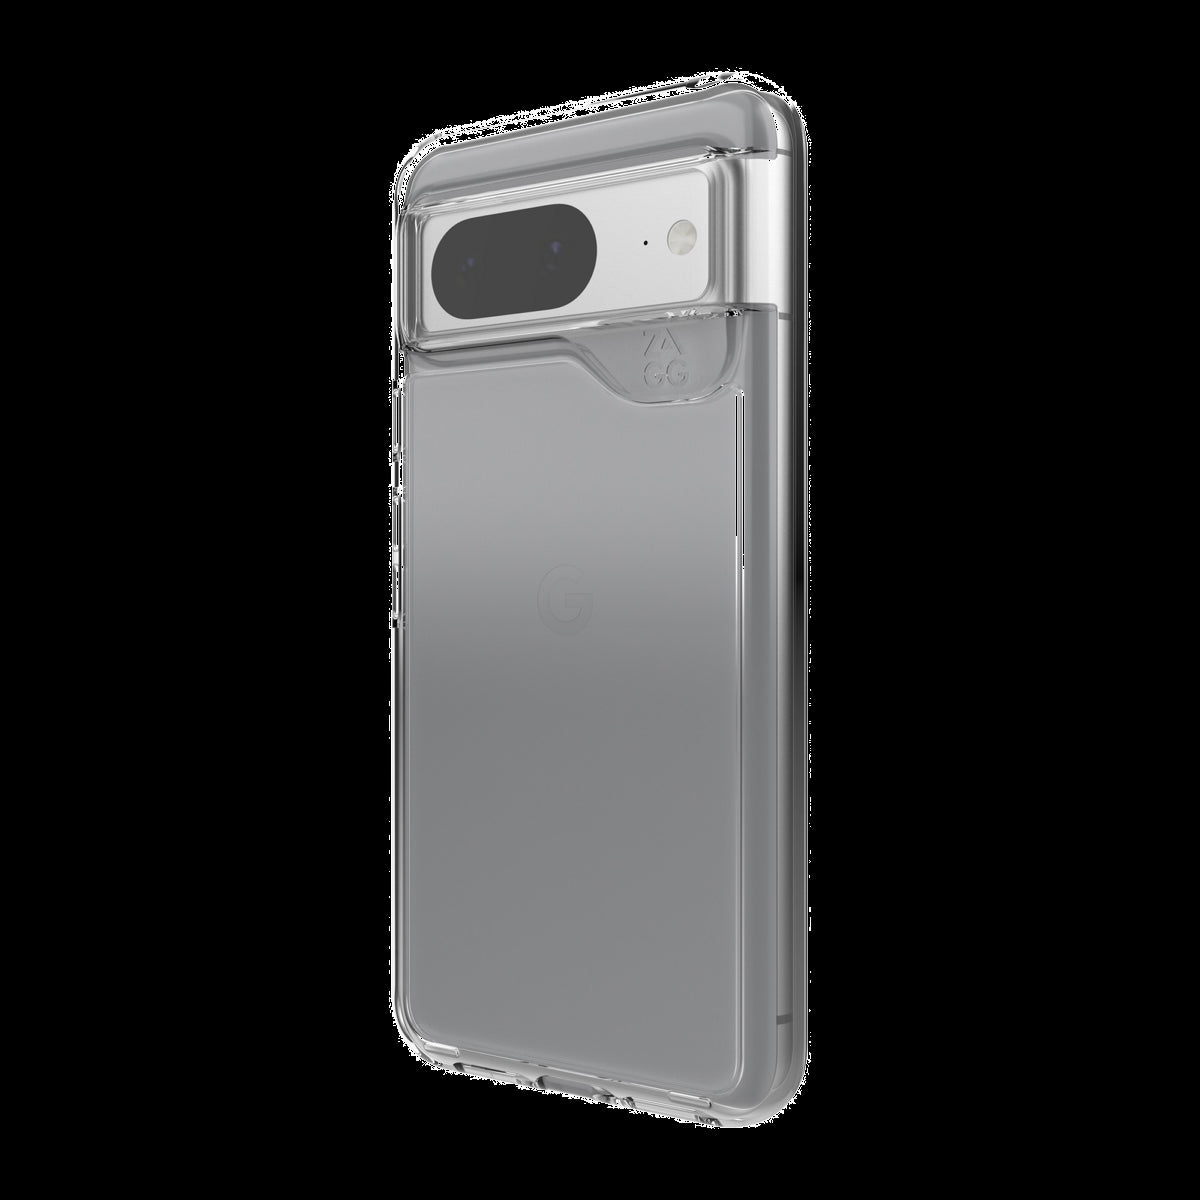 <p>Strengthened with Graphene, ZAGG's Crystal Palace case combines an ultra-slim, crystal-clear profile with up to 13 ft drop protection.</p>